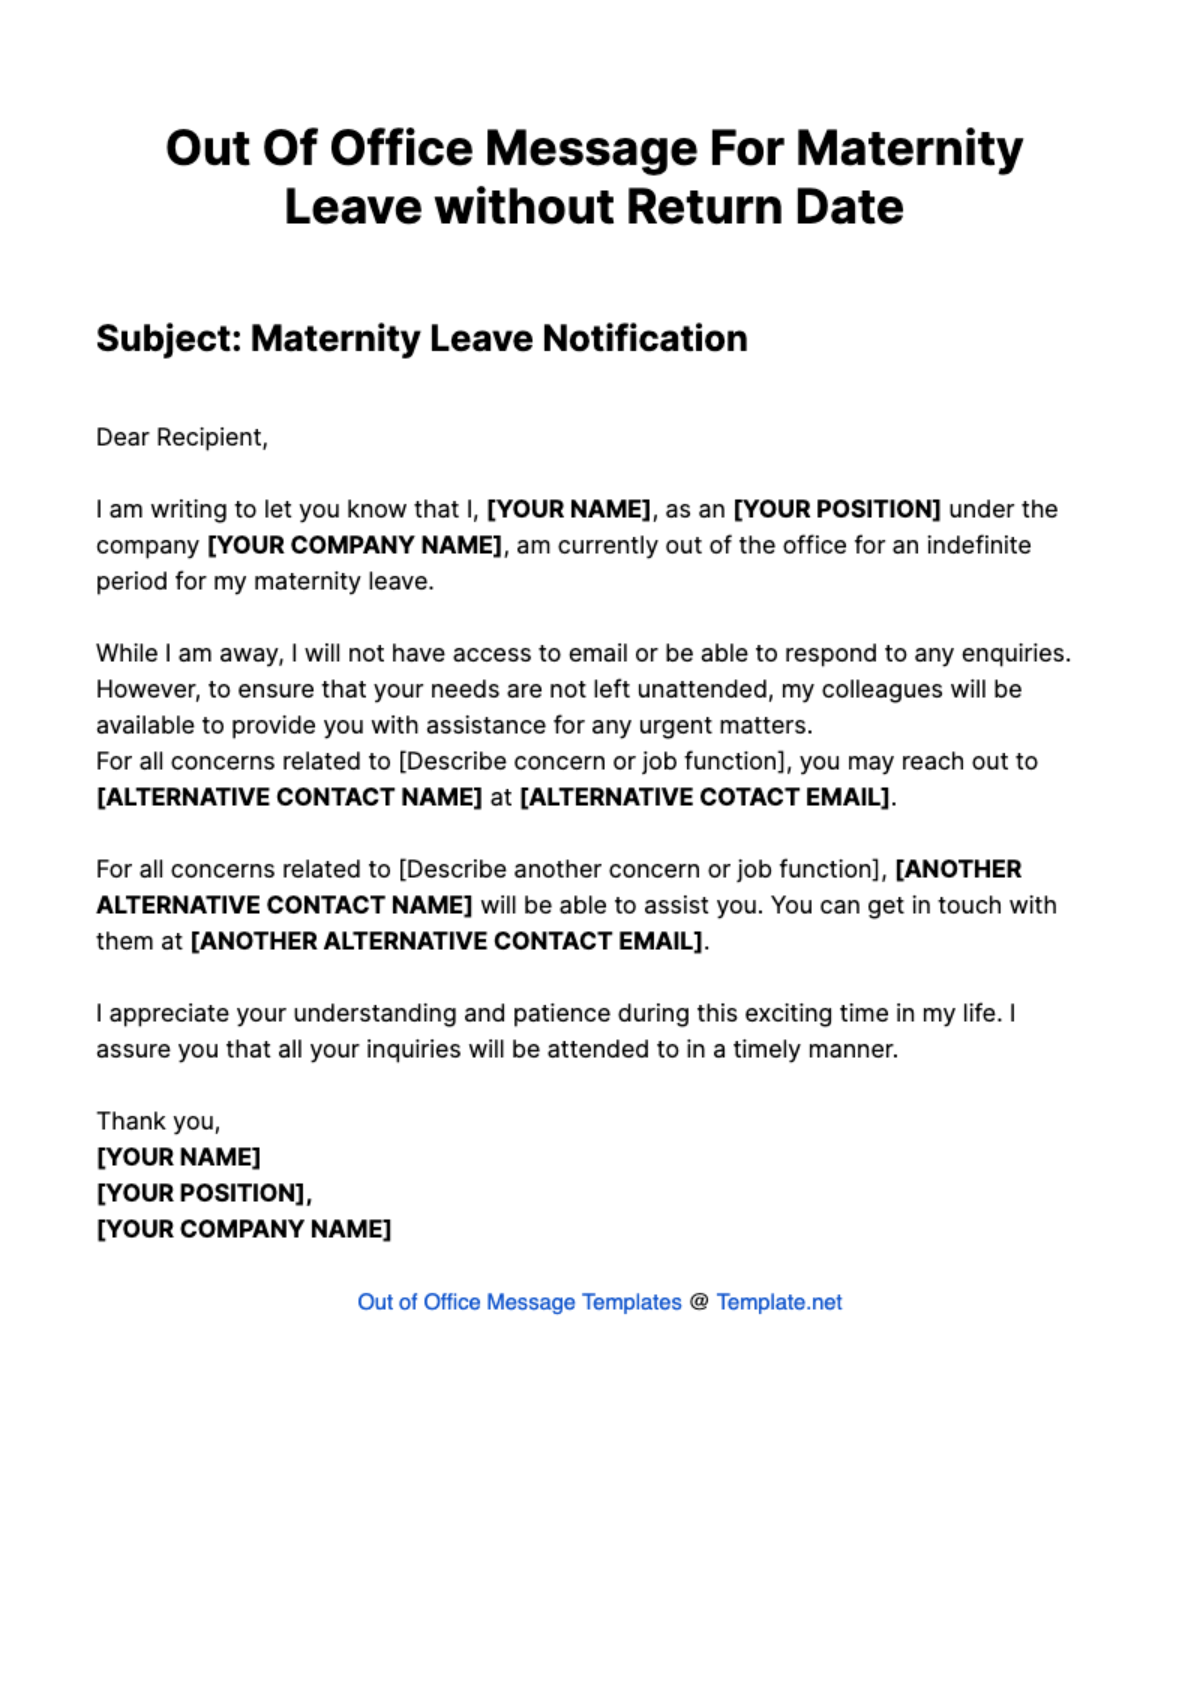 Out of Office Message For Maternity Leave without Return Date Template